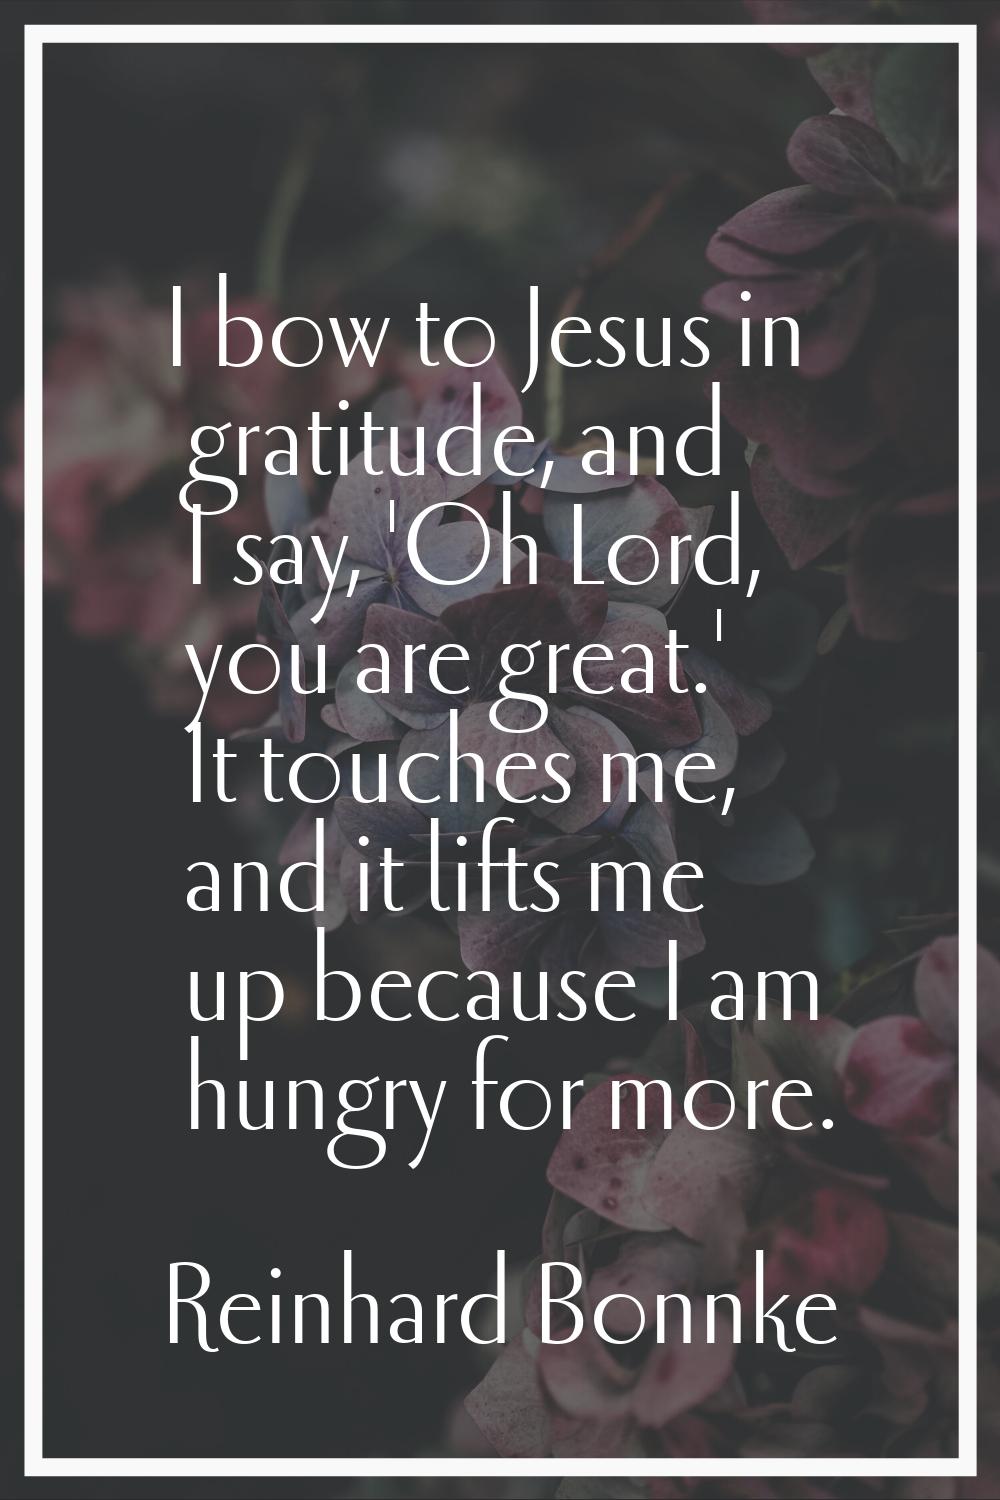 I bow to Jesus in gratitude, and I say, 'Oh Lord, you are great.' It touches me, and it lifts me up